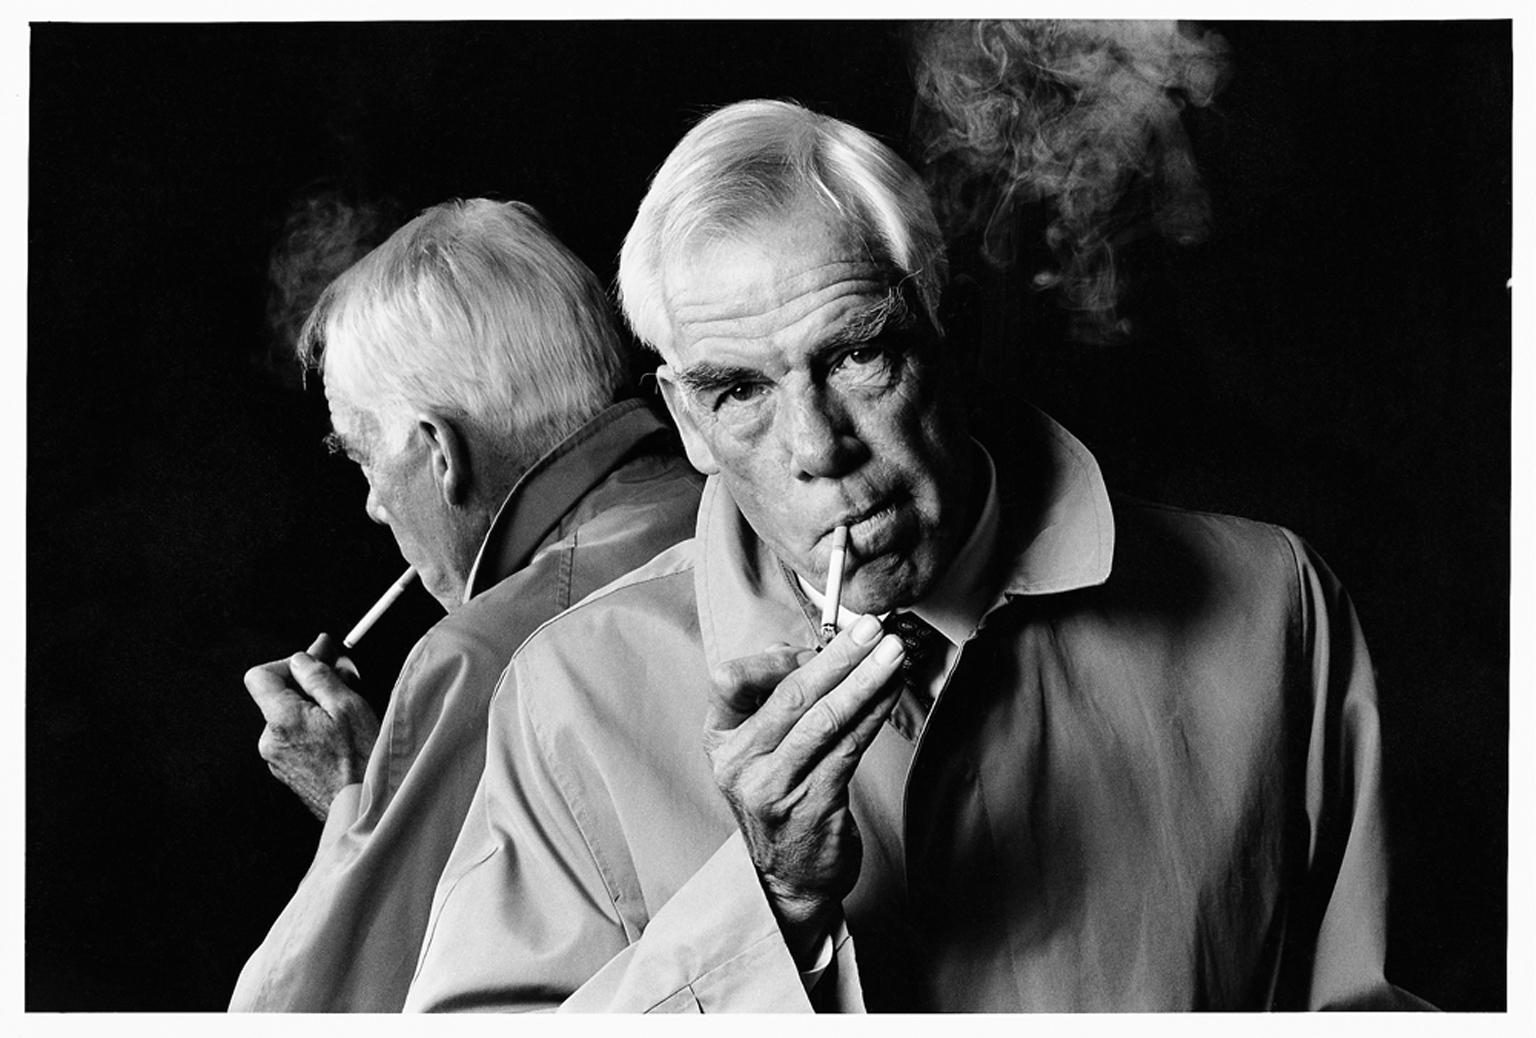 David Steen Portrait Photograph - Lee Marvin - 20th Century Photography, Wandering Star, Hollywood, Movies